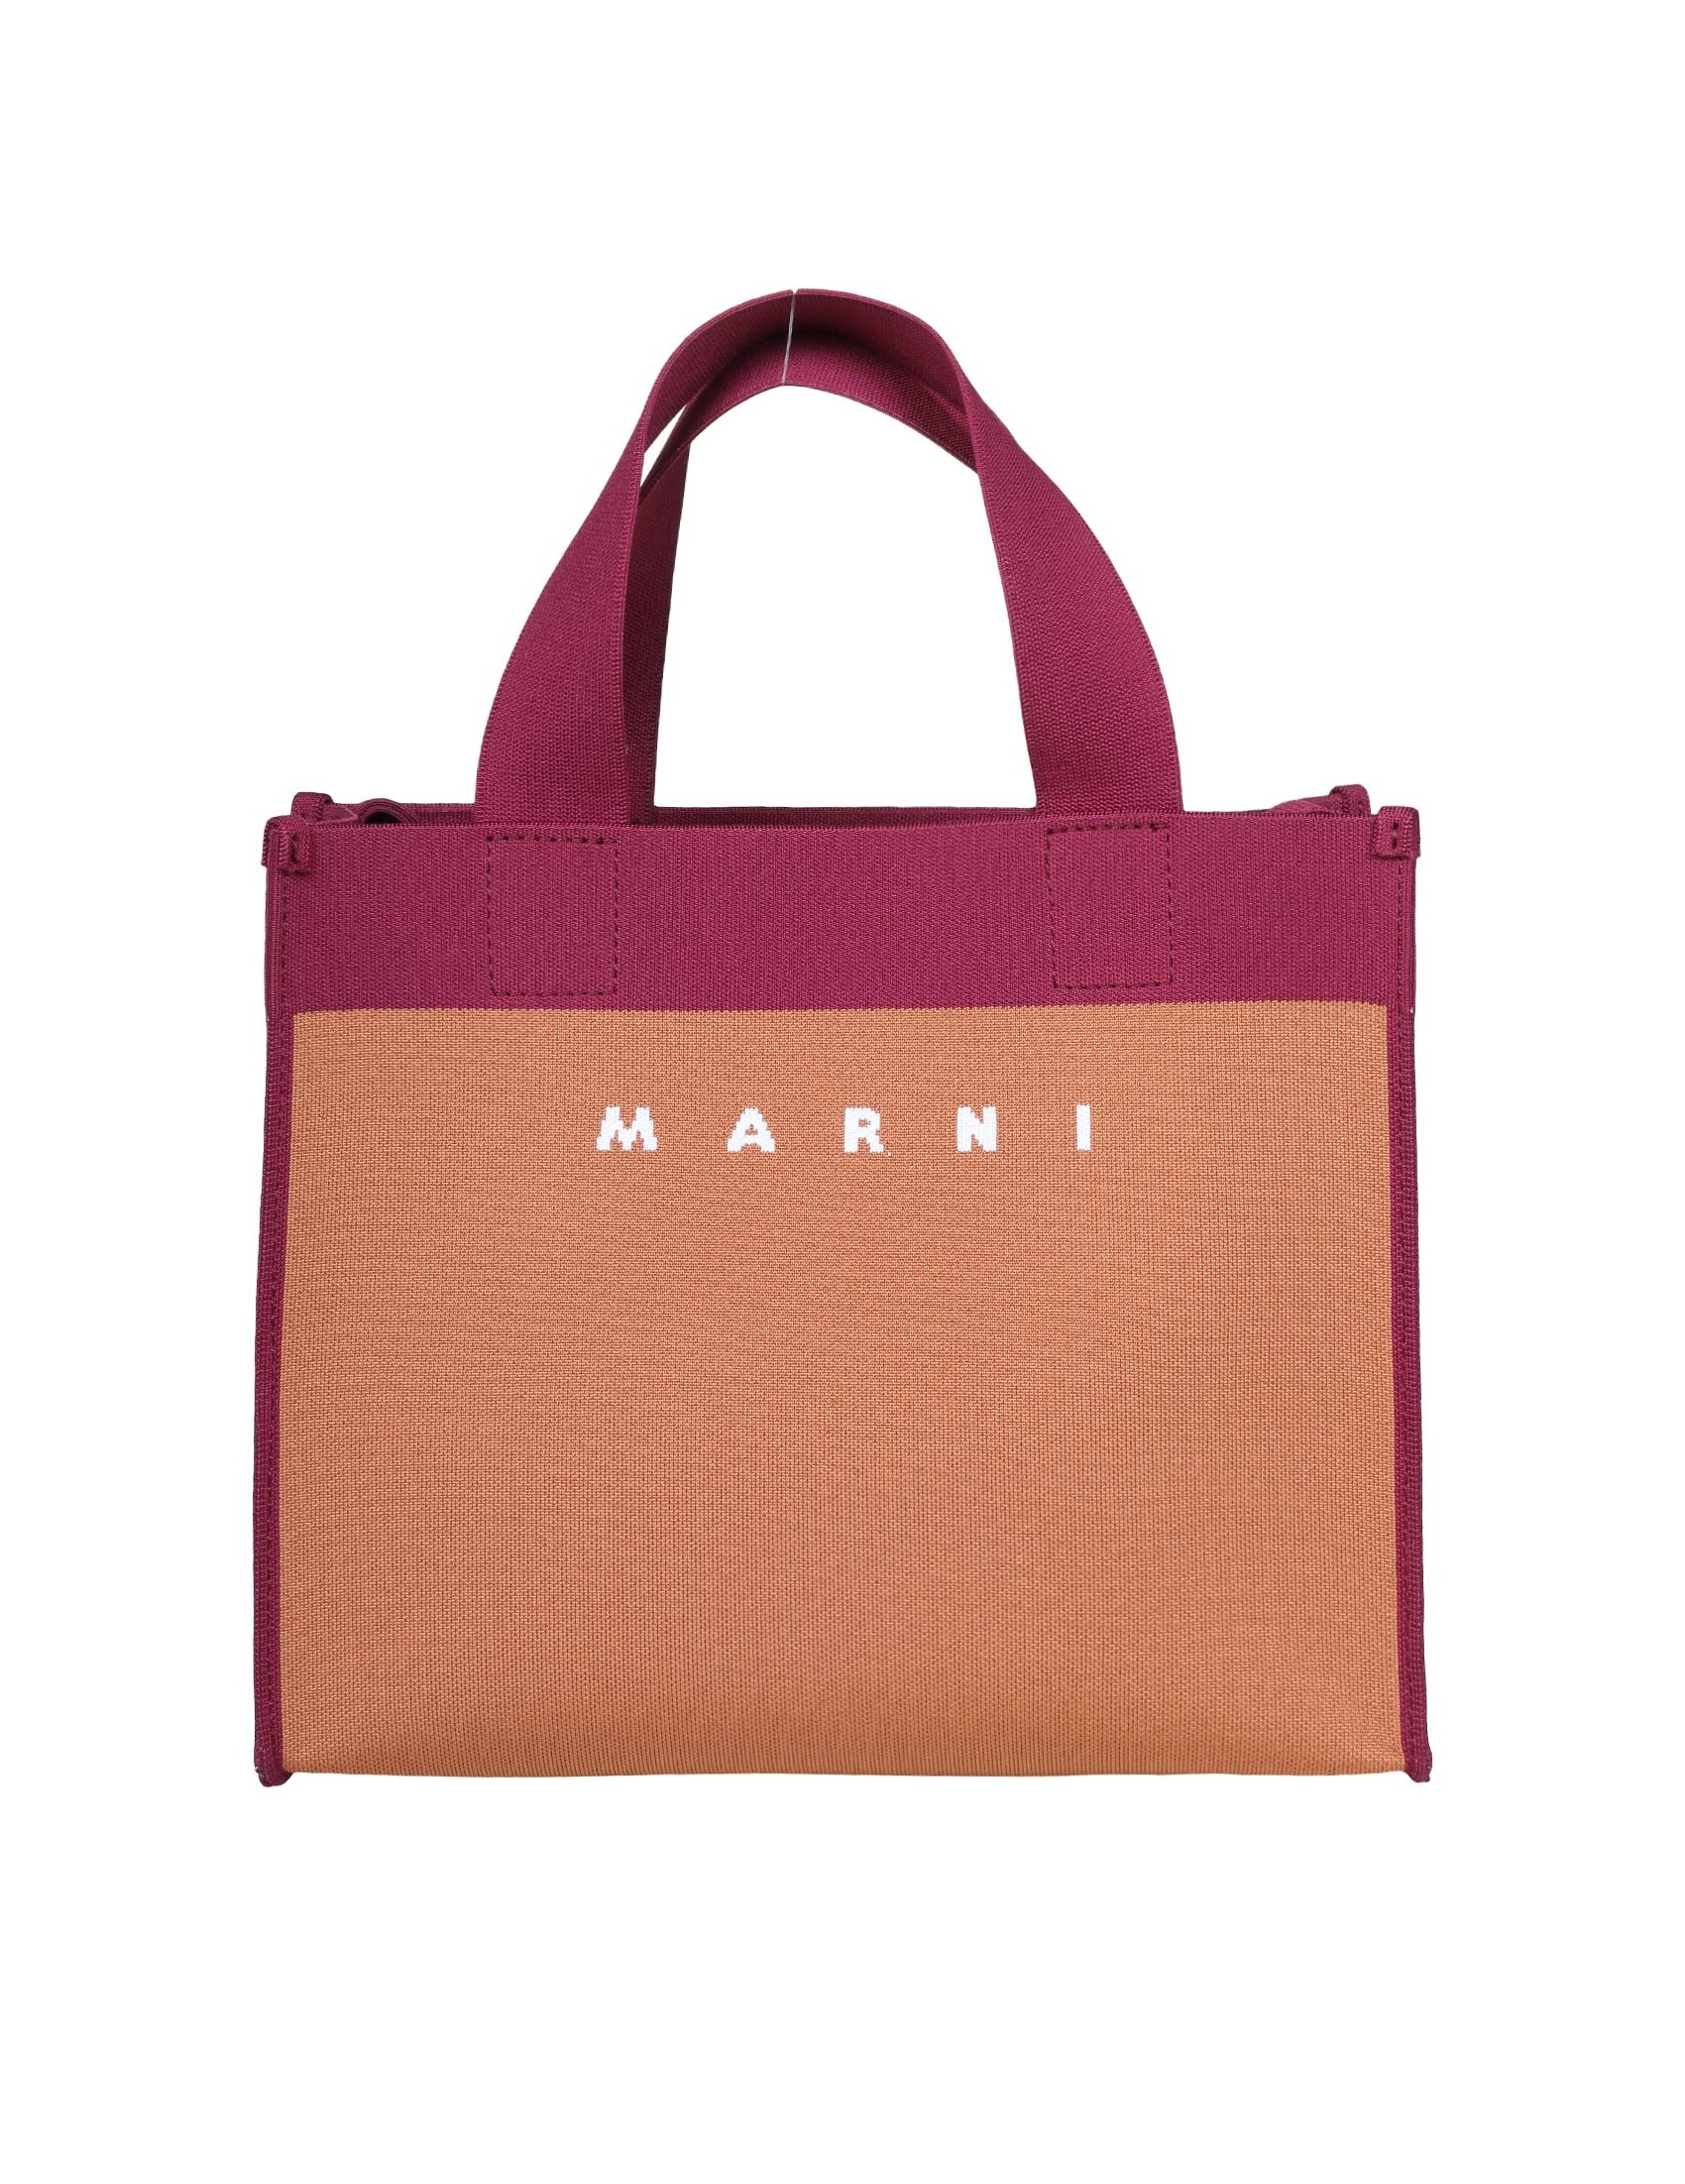 MARNI SMALL LEATHER KNITTED SHOPPING BAG